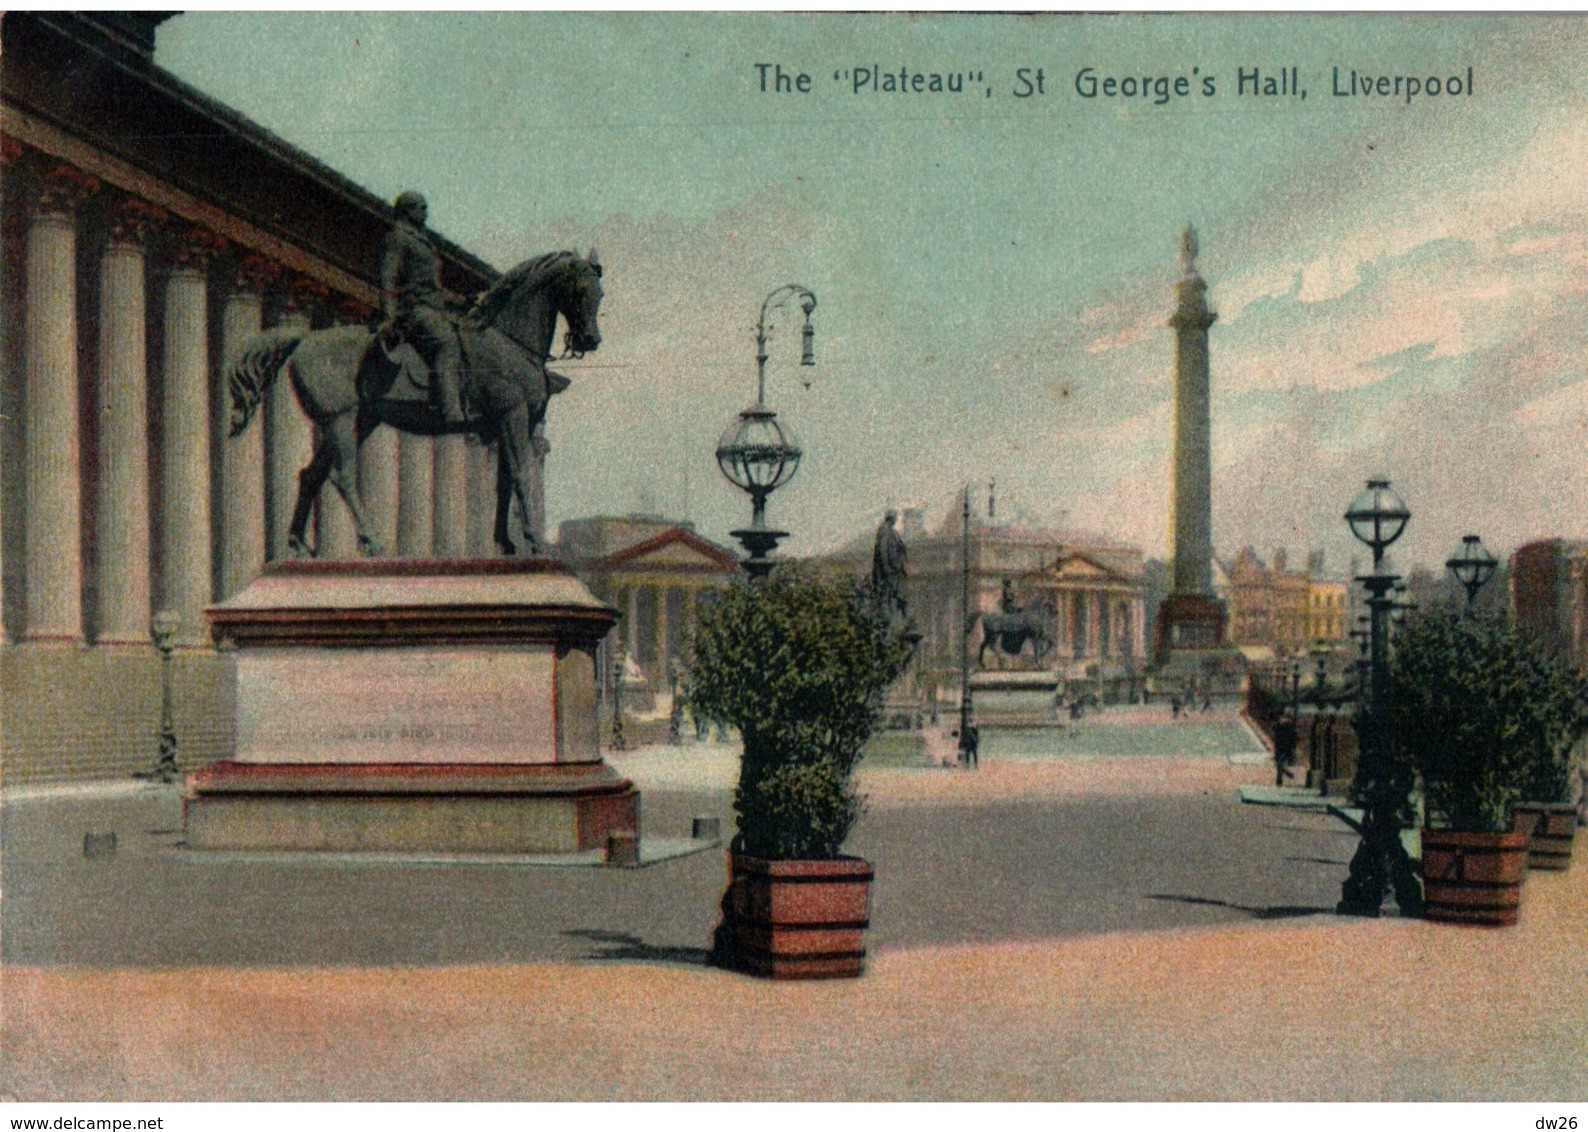 The Plateau St George's Hall - Liverpool - Pelham Series N° 6207 - Postcard Not Circulated - Liverpool